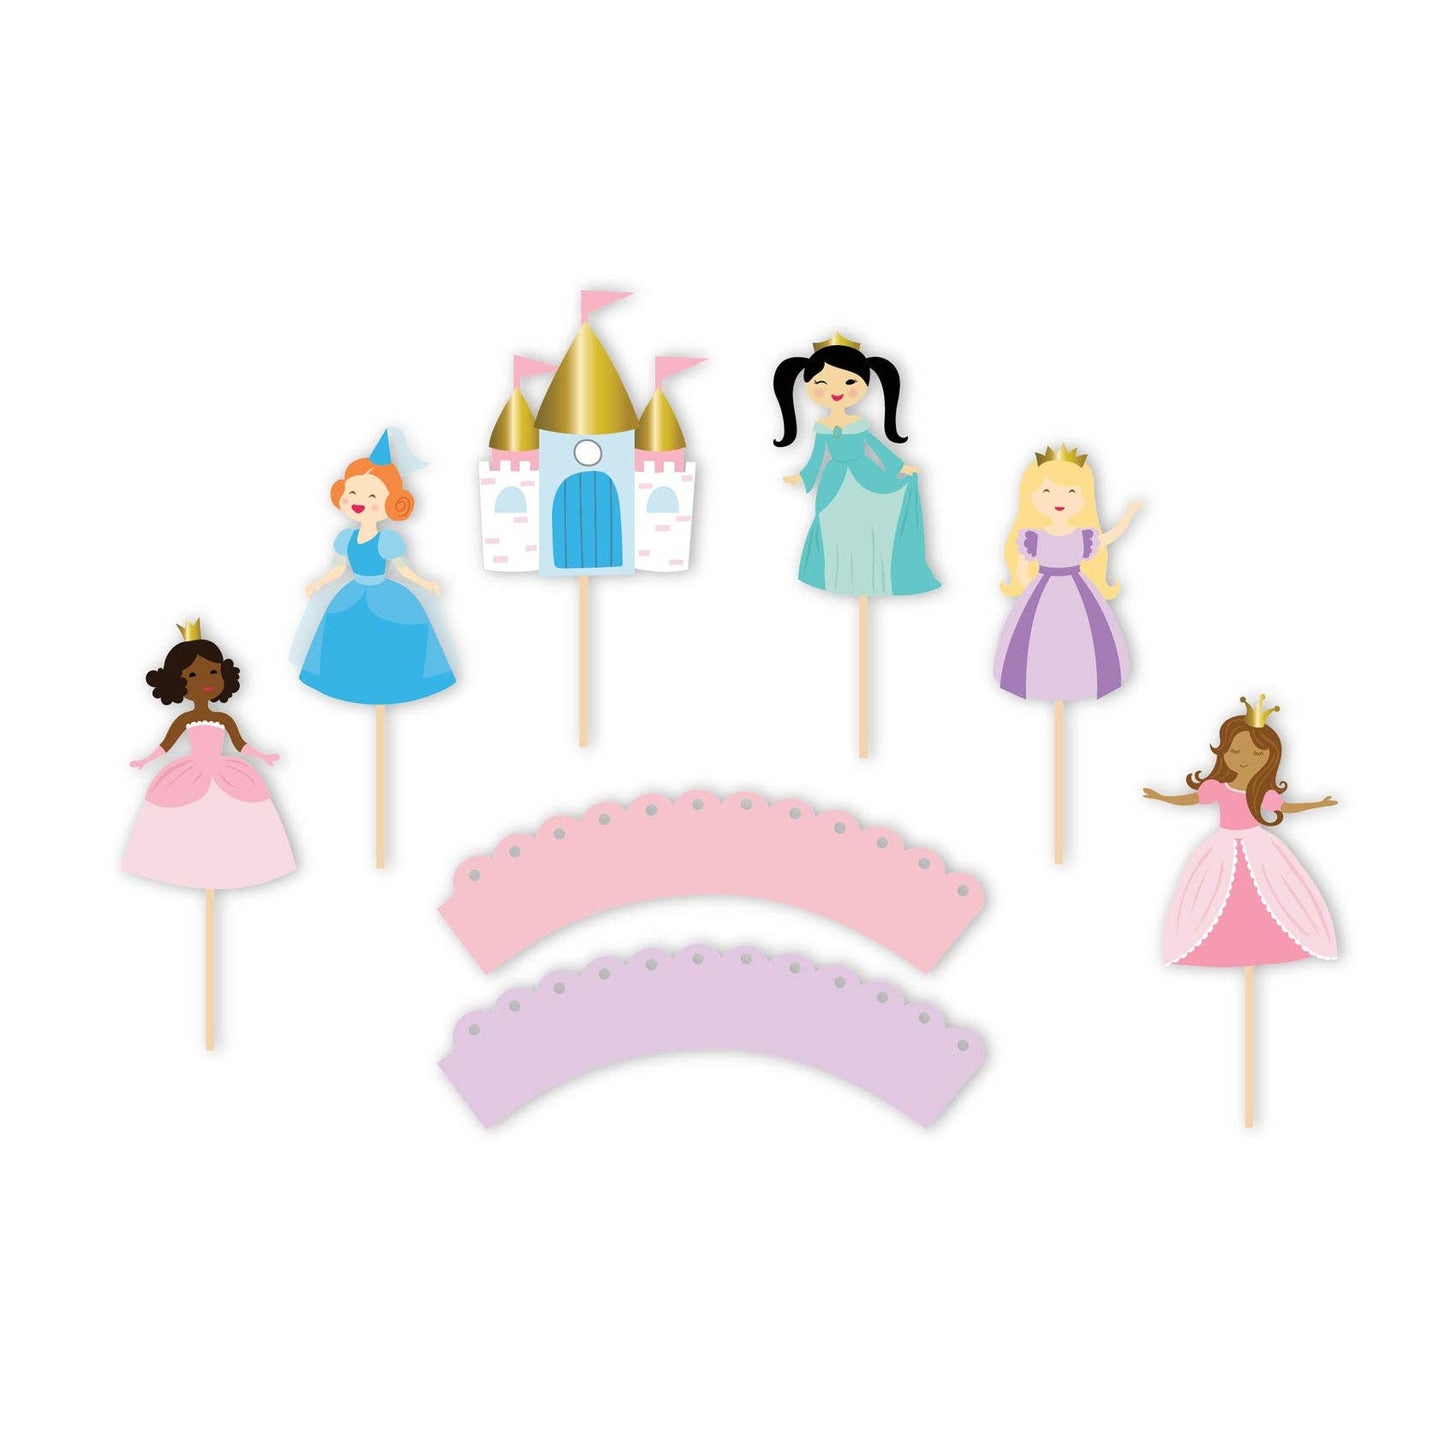 Pretty Princess - Cupcake Toppers & Wrappers, 12 ct